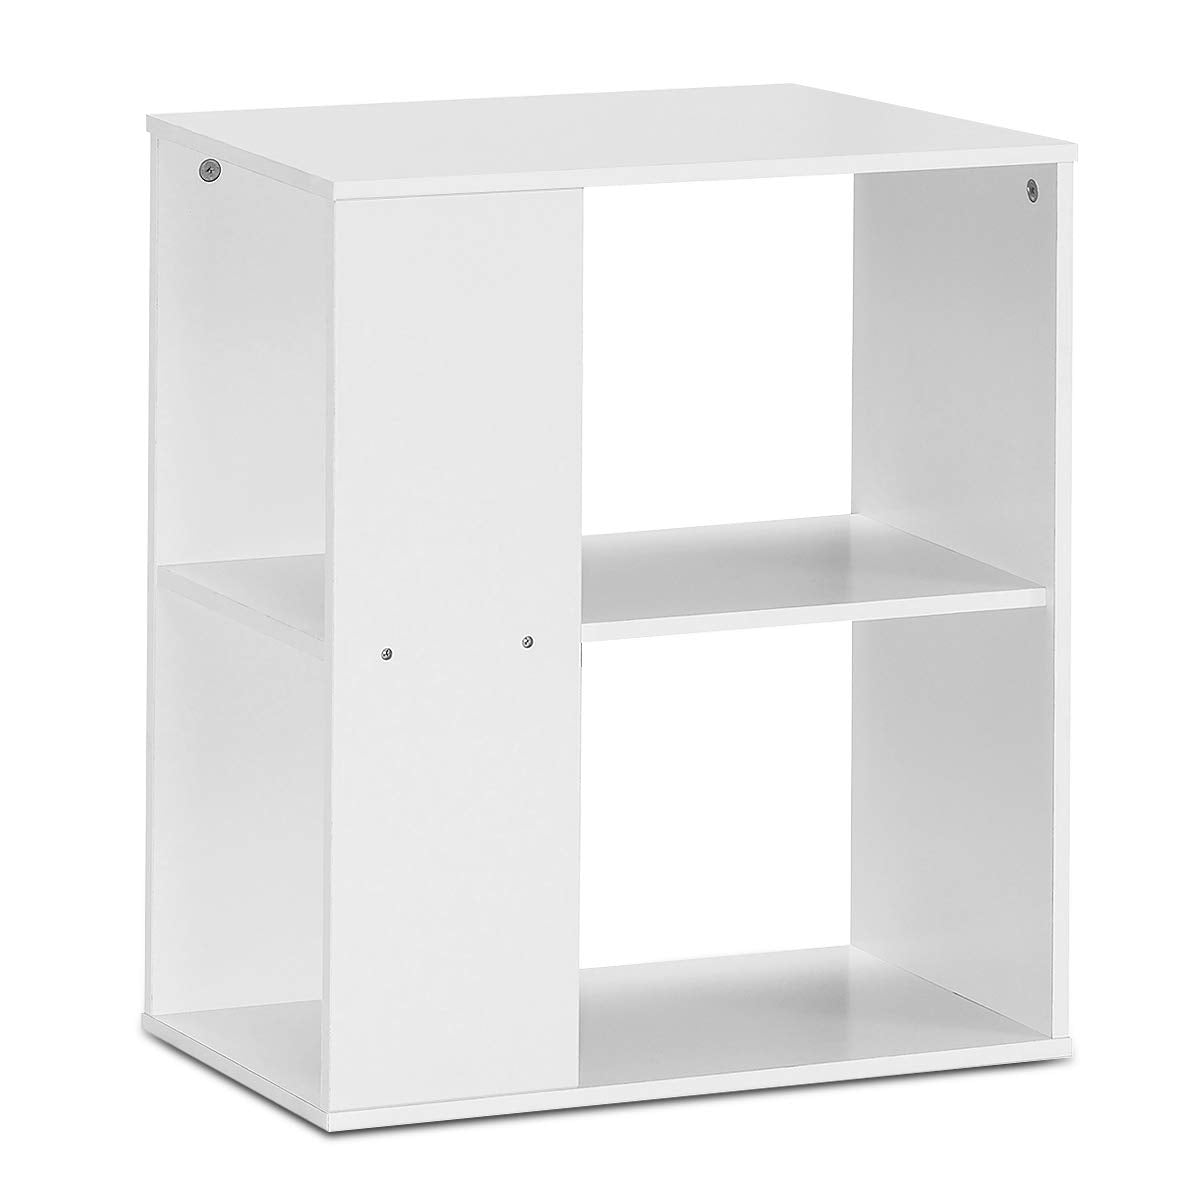 Giantex End Table with Shelves 3-Tier Open Storage